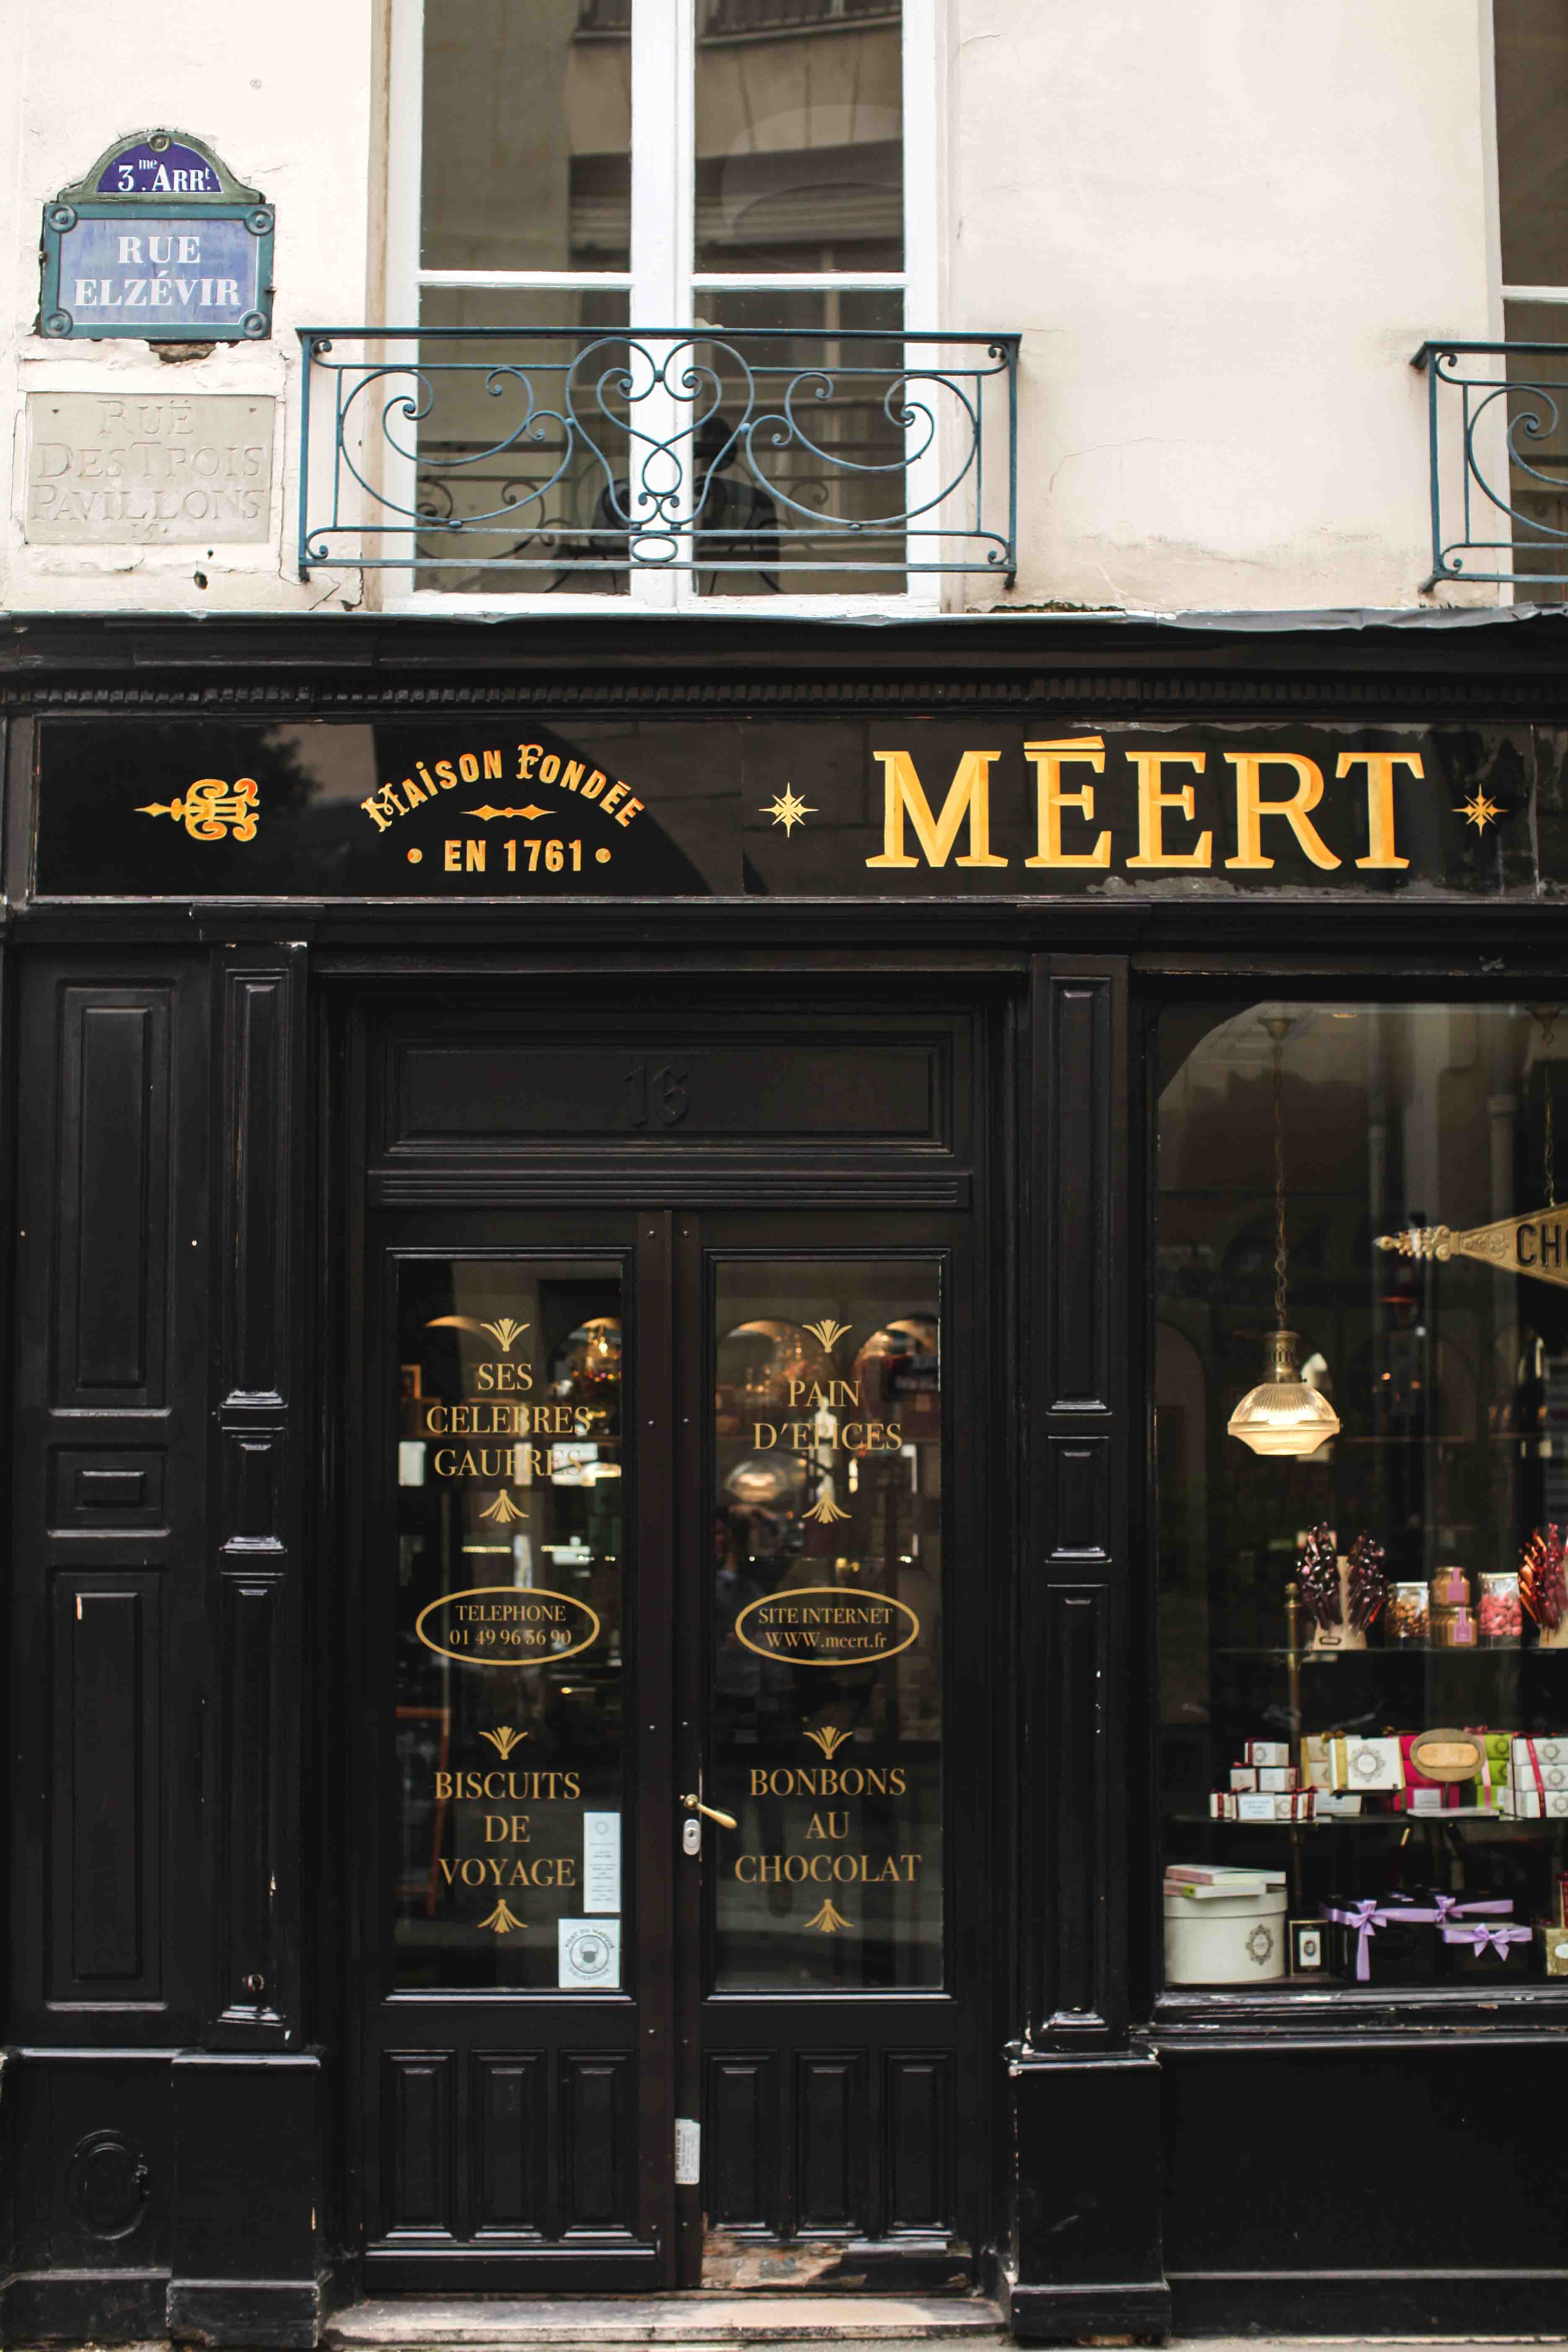 Meert, from Lille to Paris